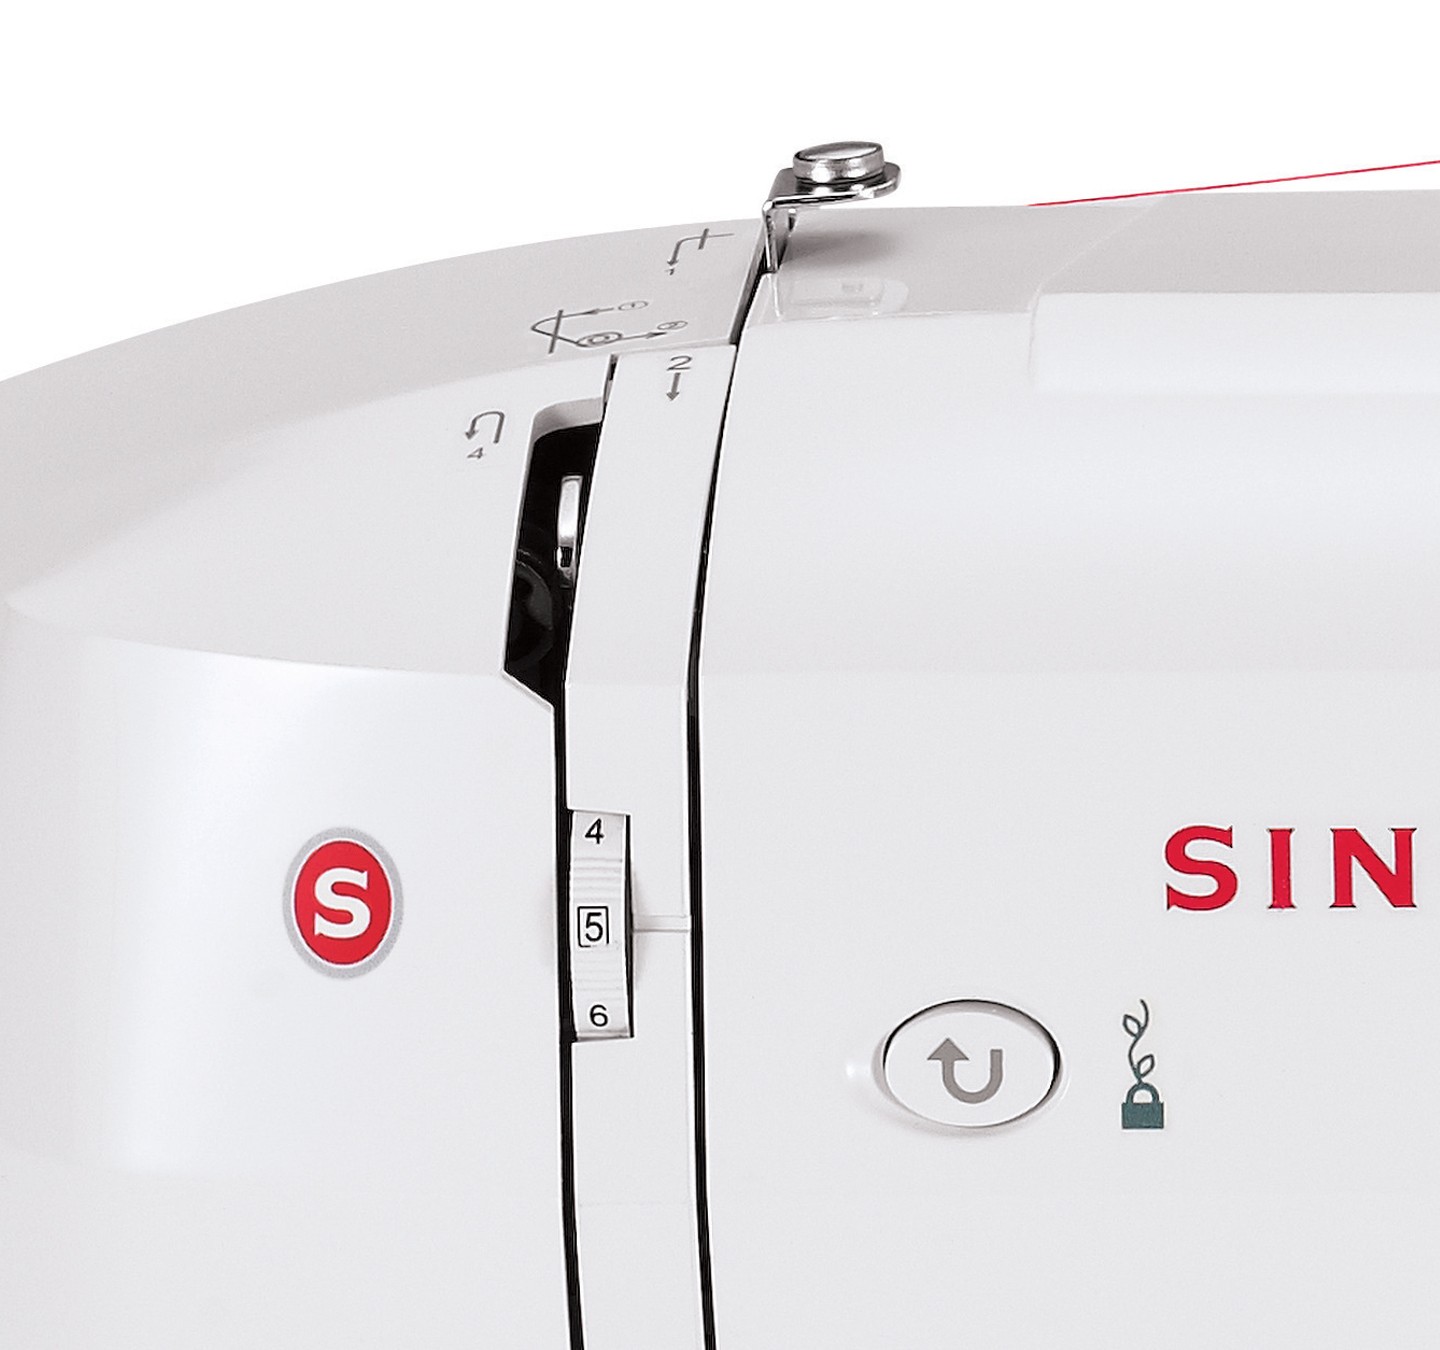 SINGER BRILLIANCE 6180 < Singer Sewing < Household Electronic Sewing Machines - Machine